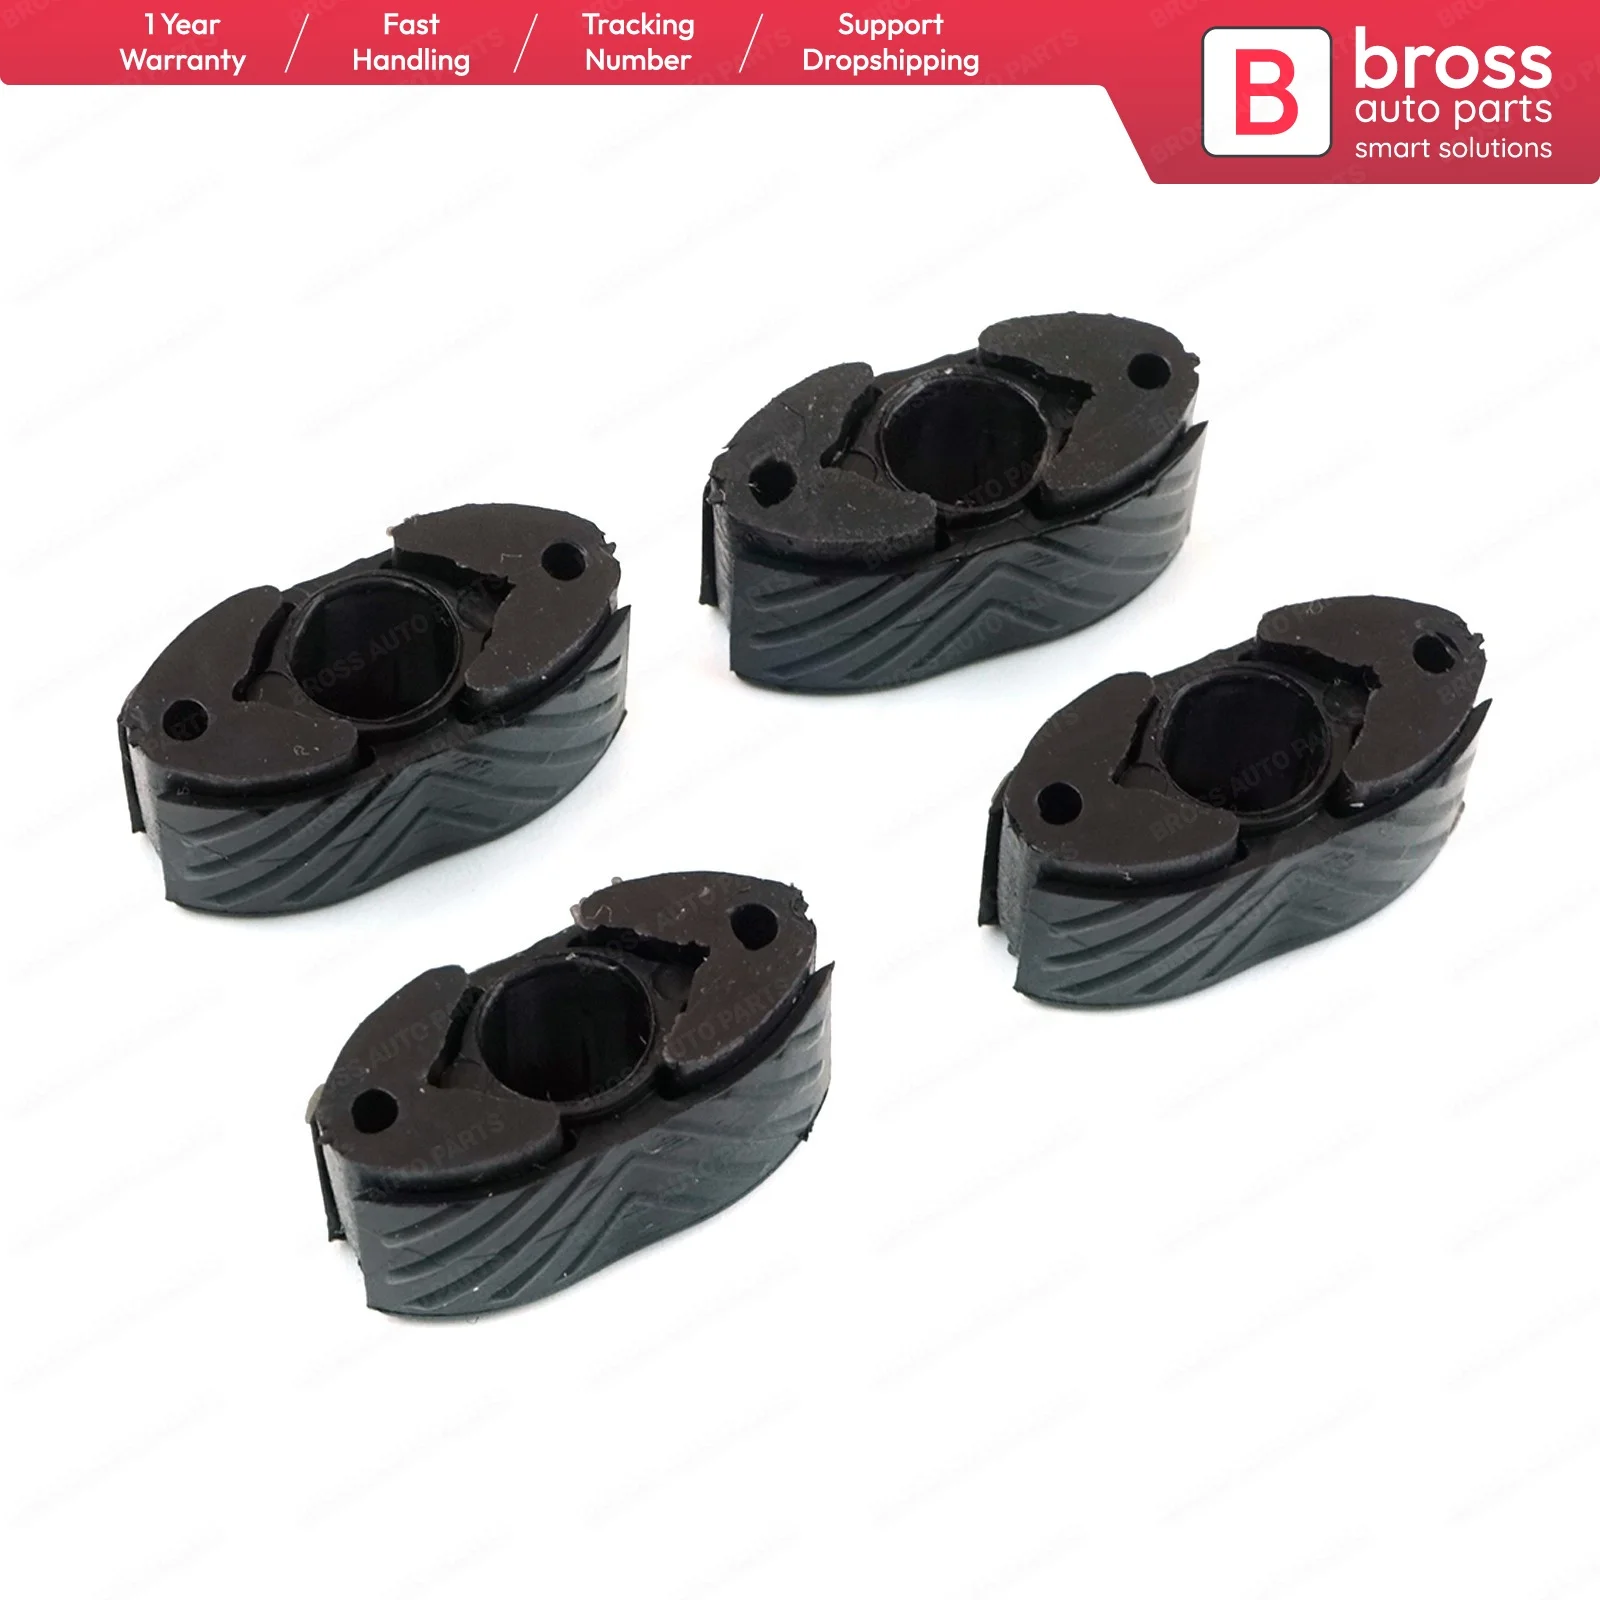 BSR11-1 4 Pieces Sunroof Sliding Shifter Holder Clips 7701209744 for Renault Megane MK2 Scenic MK2 Made in Turkey